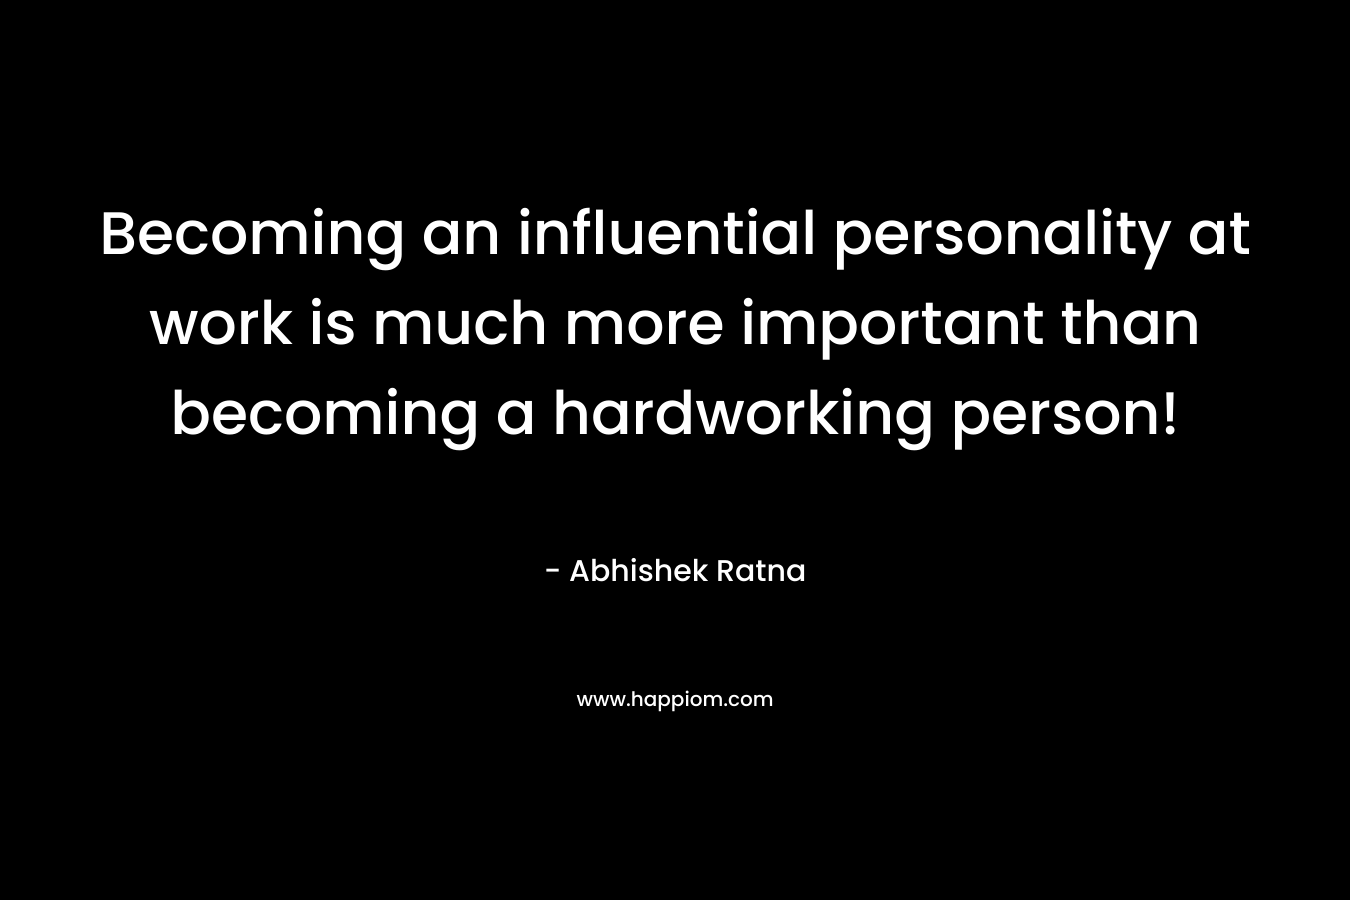 Becoming an influential personality at work is much more important than becoming a hardworking person!